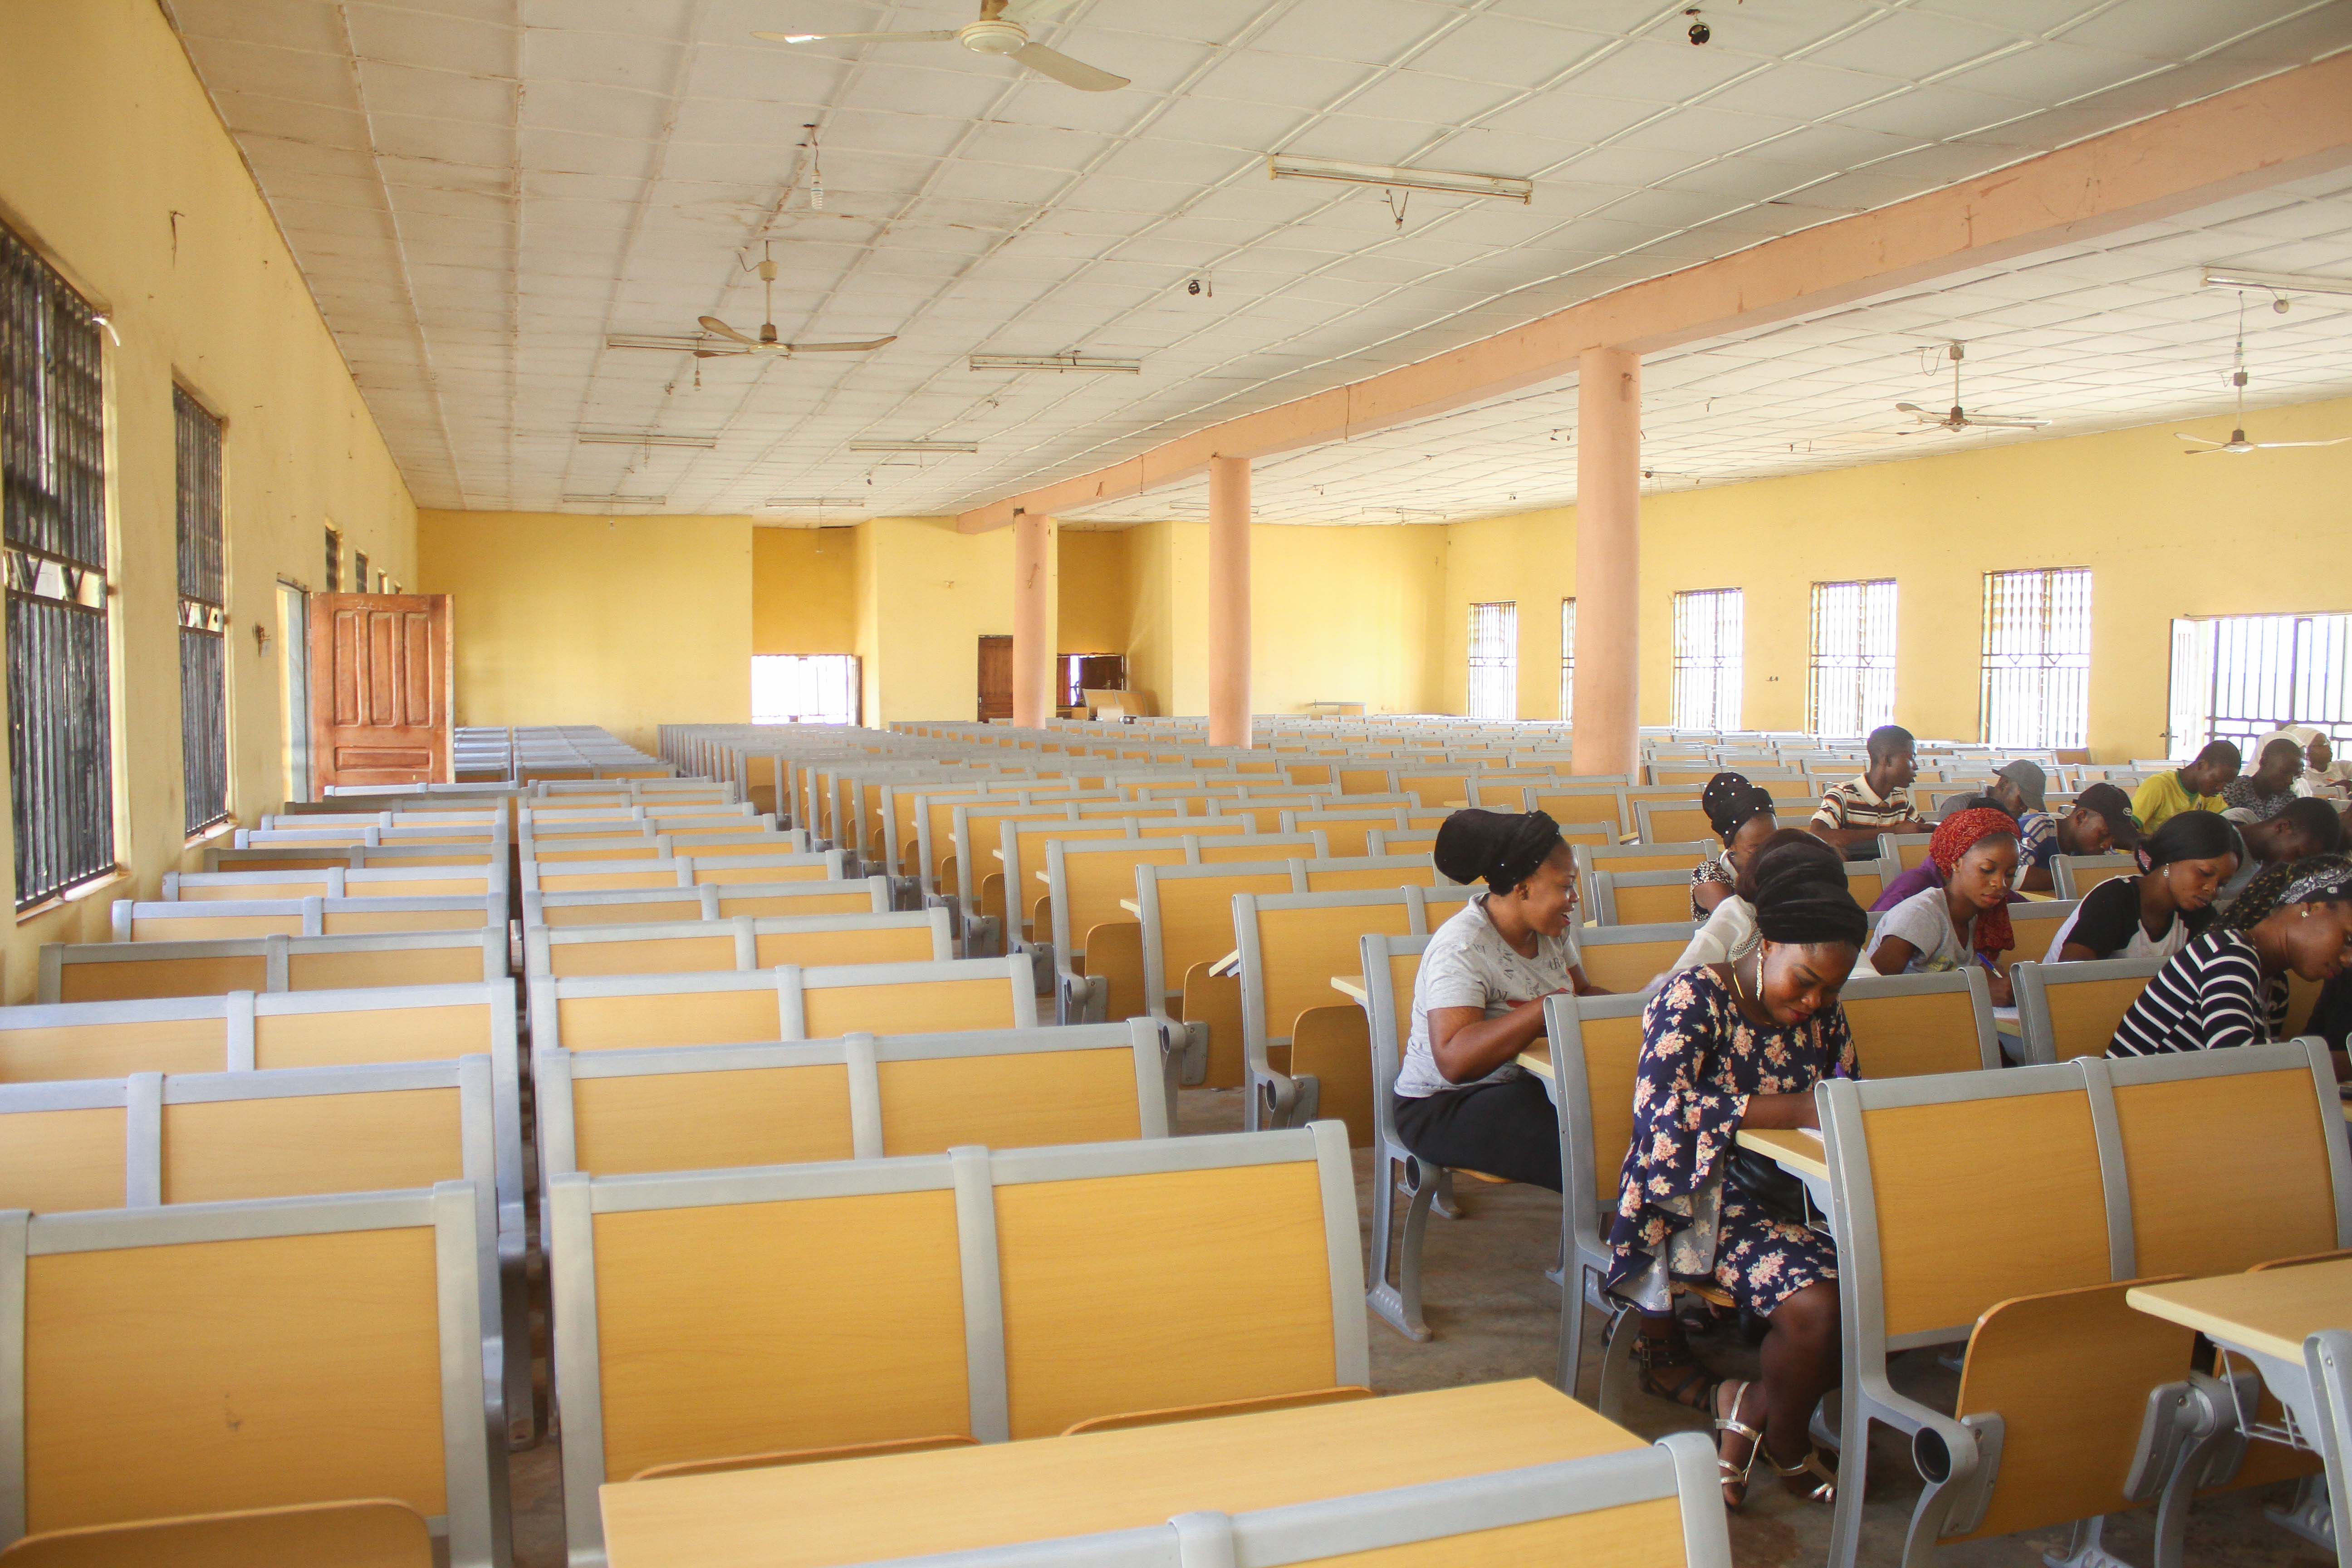 Students receiving lecture inside the Lecture Hall